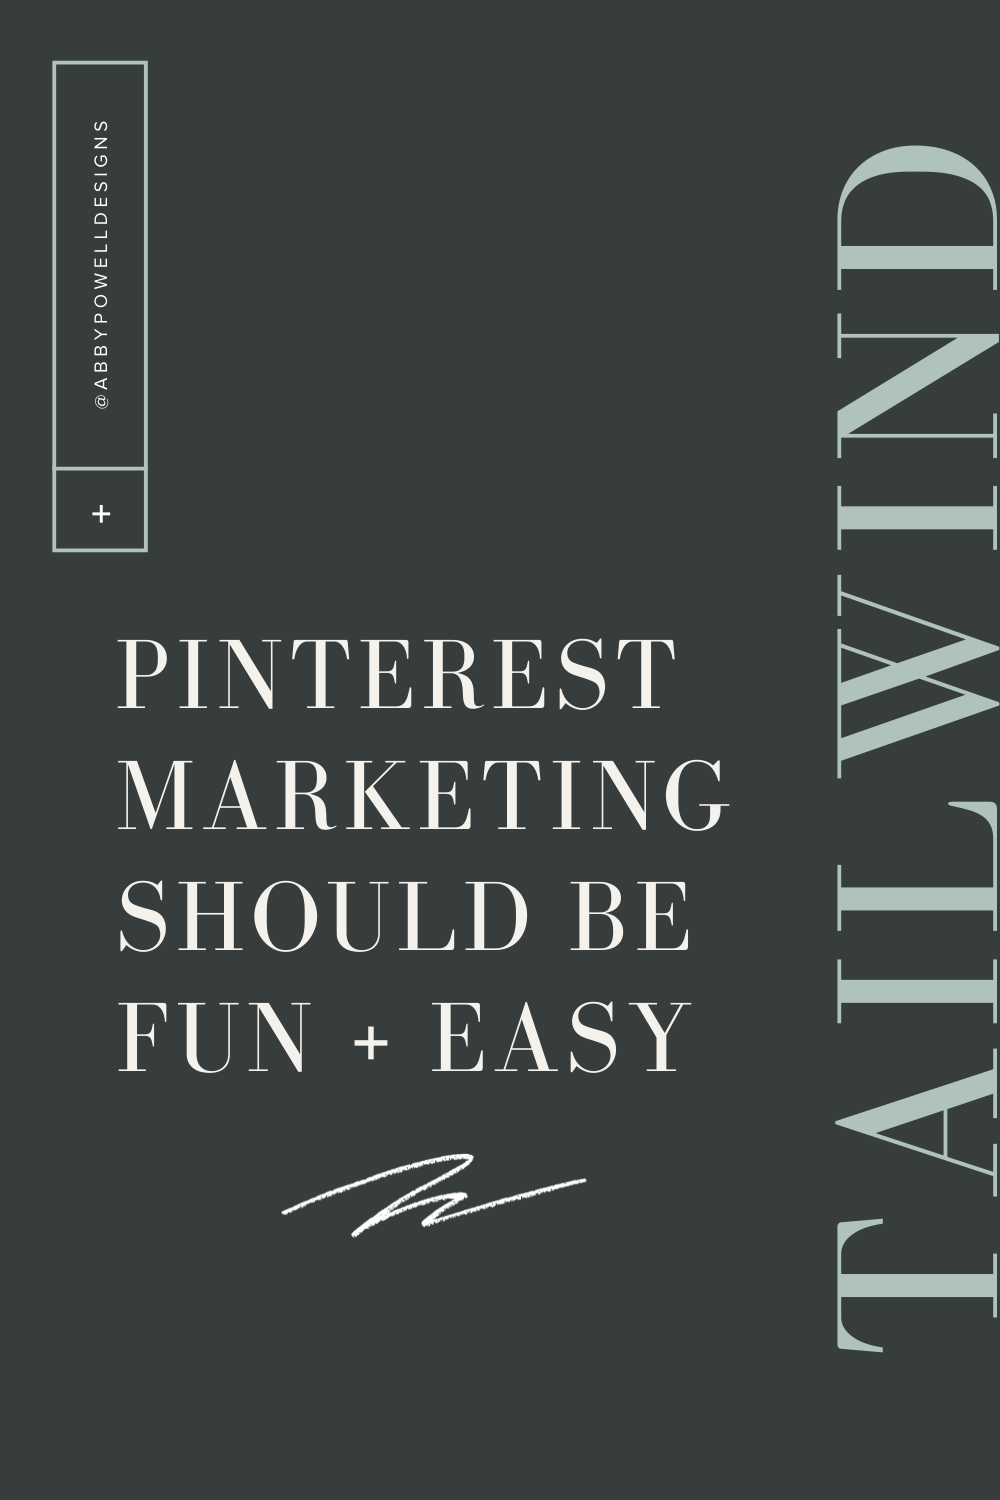 Pinterest marketing made easy with Tailwind.